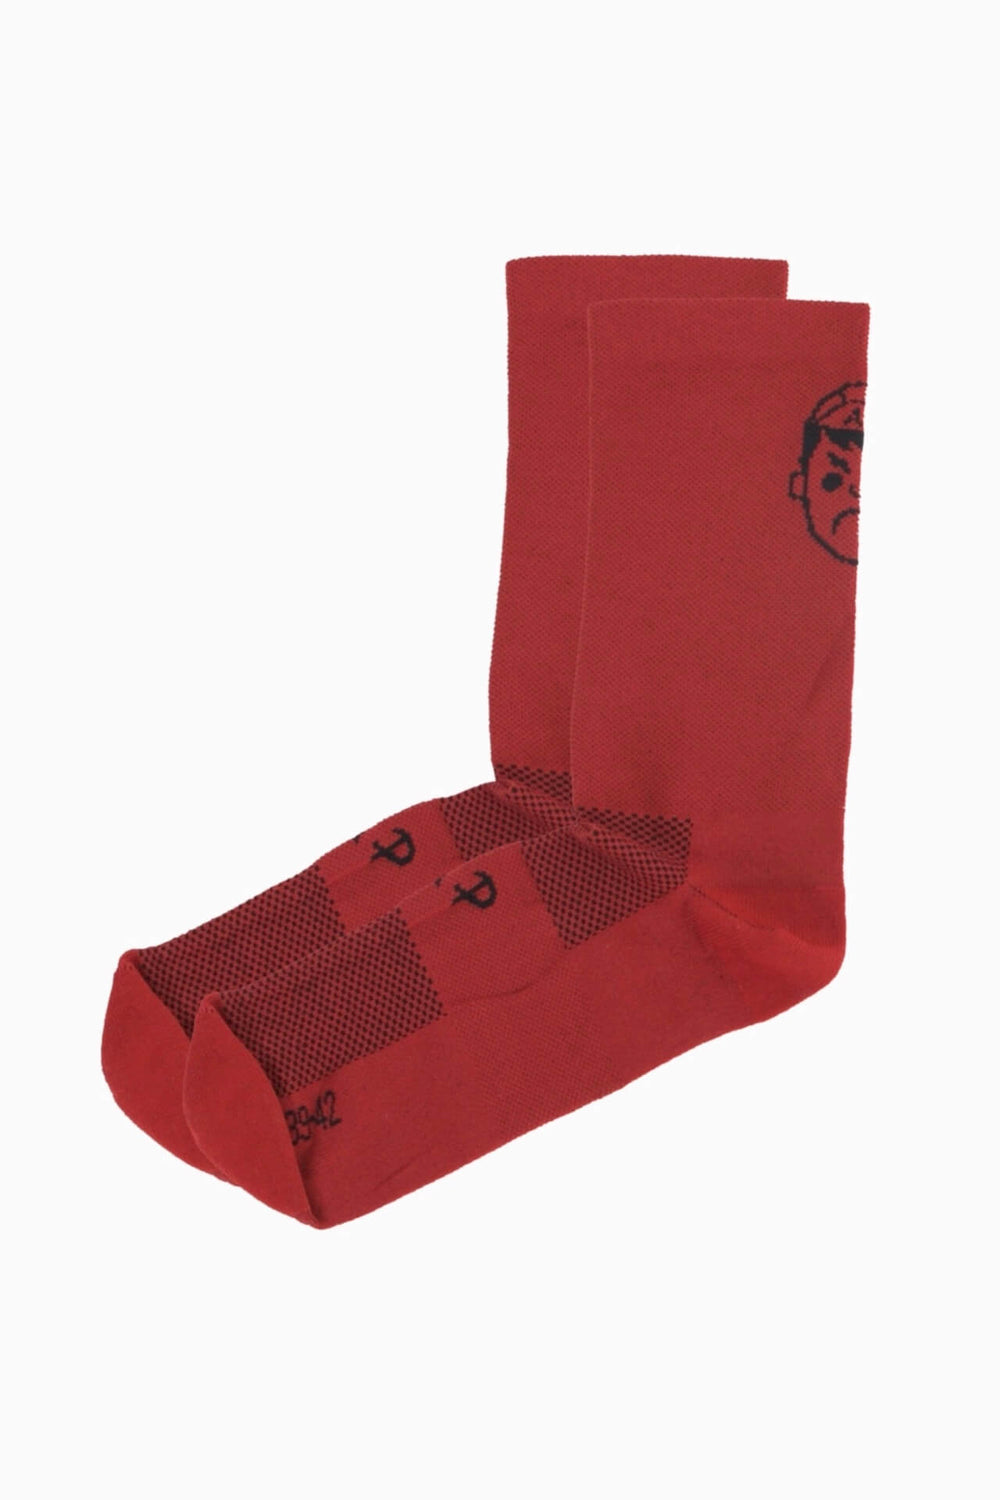 High Top Classic Cycling Socks - Bordeaux Red